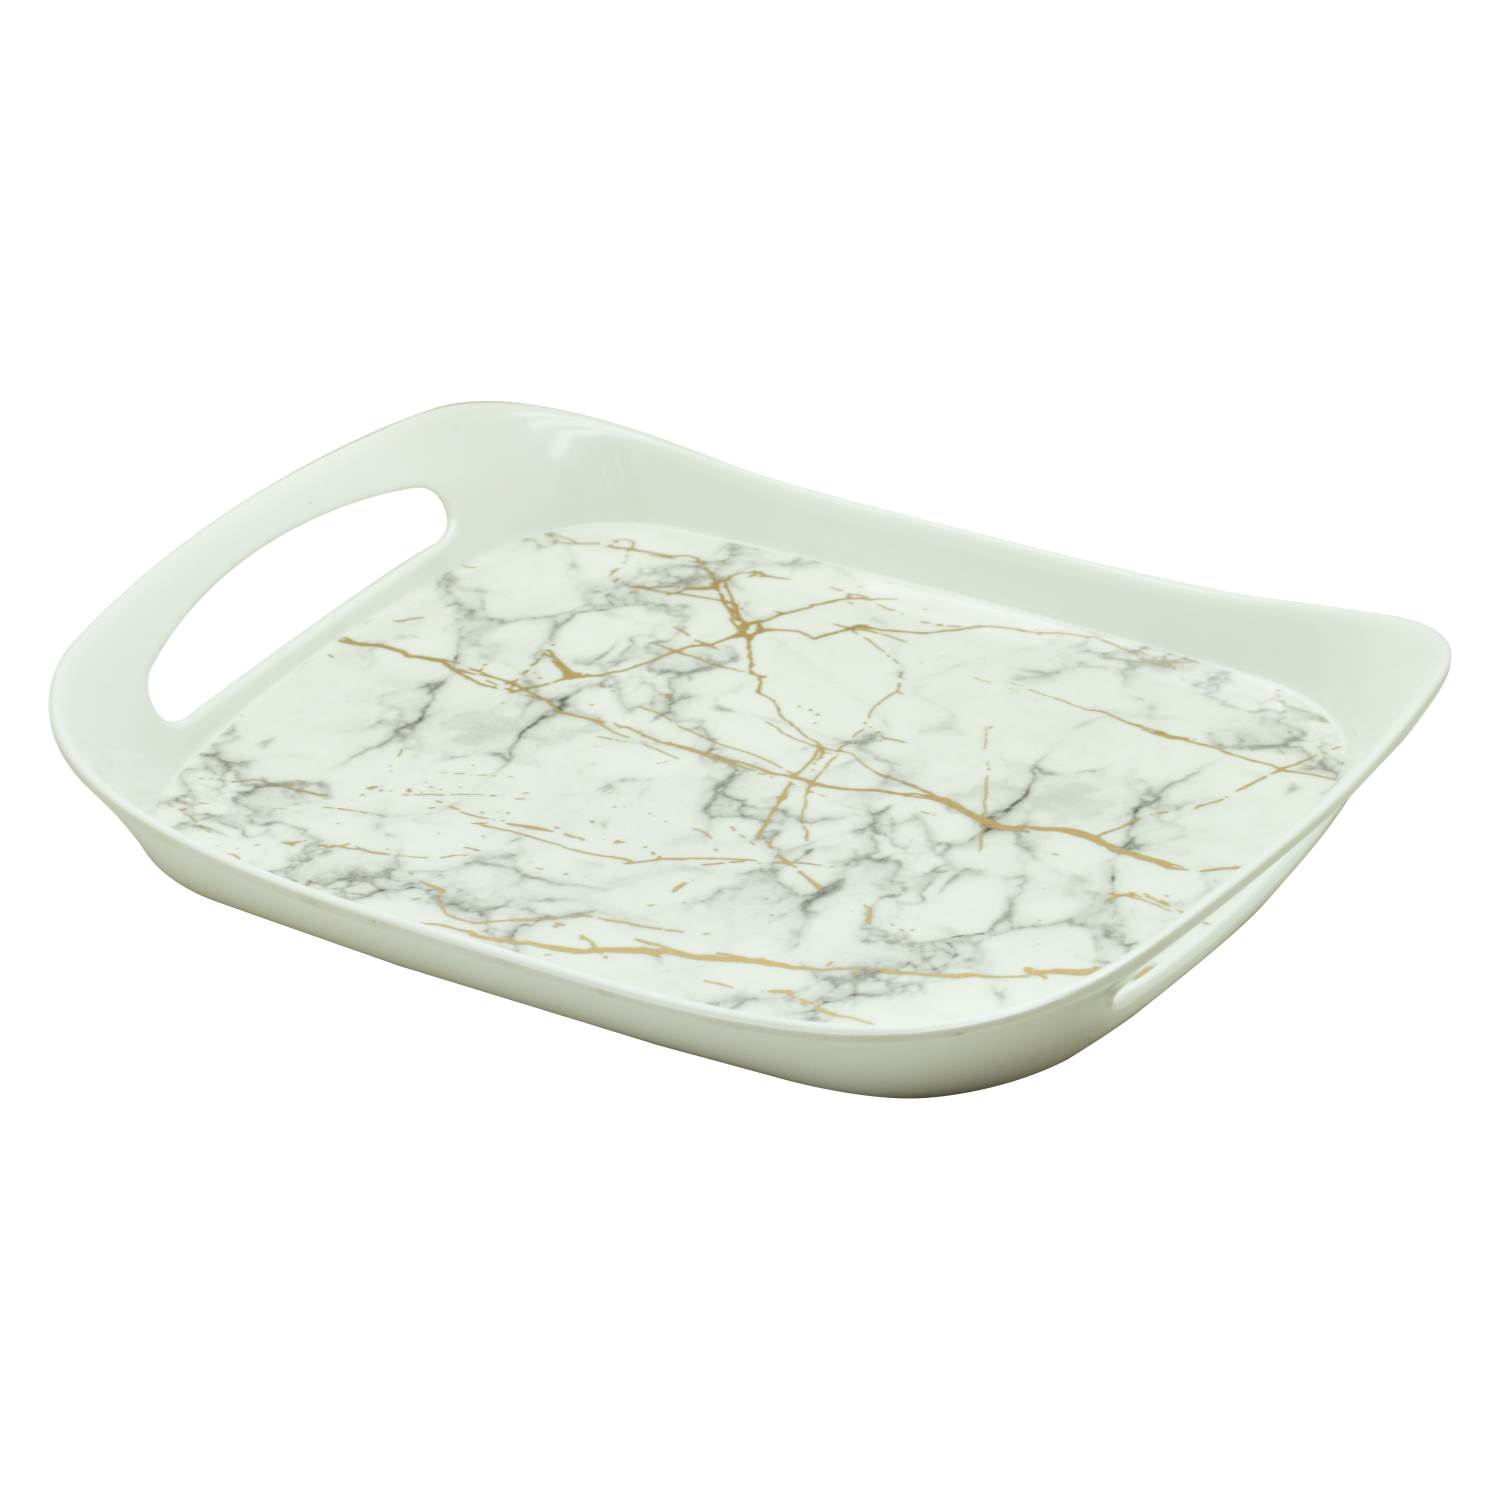 Rk Comfort Tray Small White Static Gold, Dwt1024Wsg, 12.25" X 9"